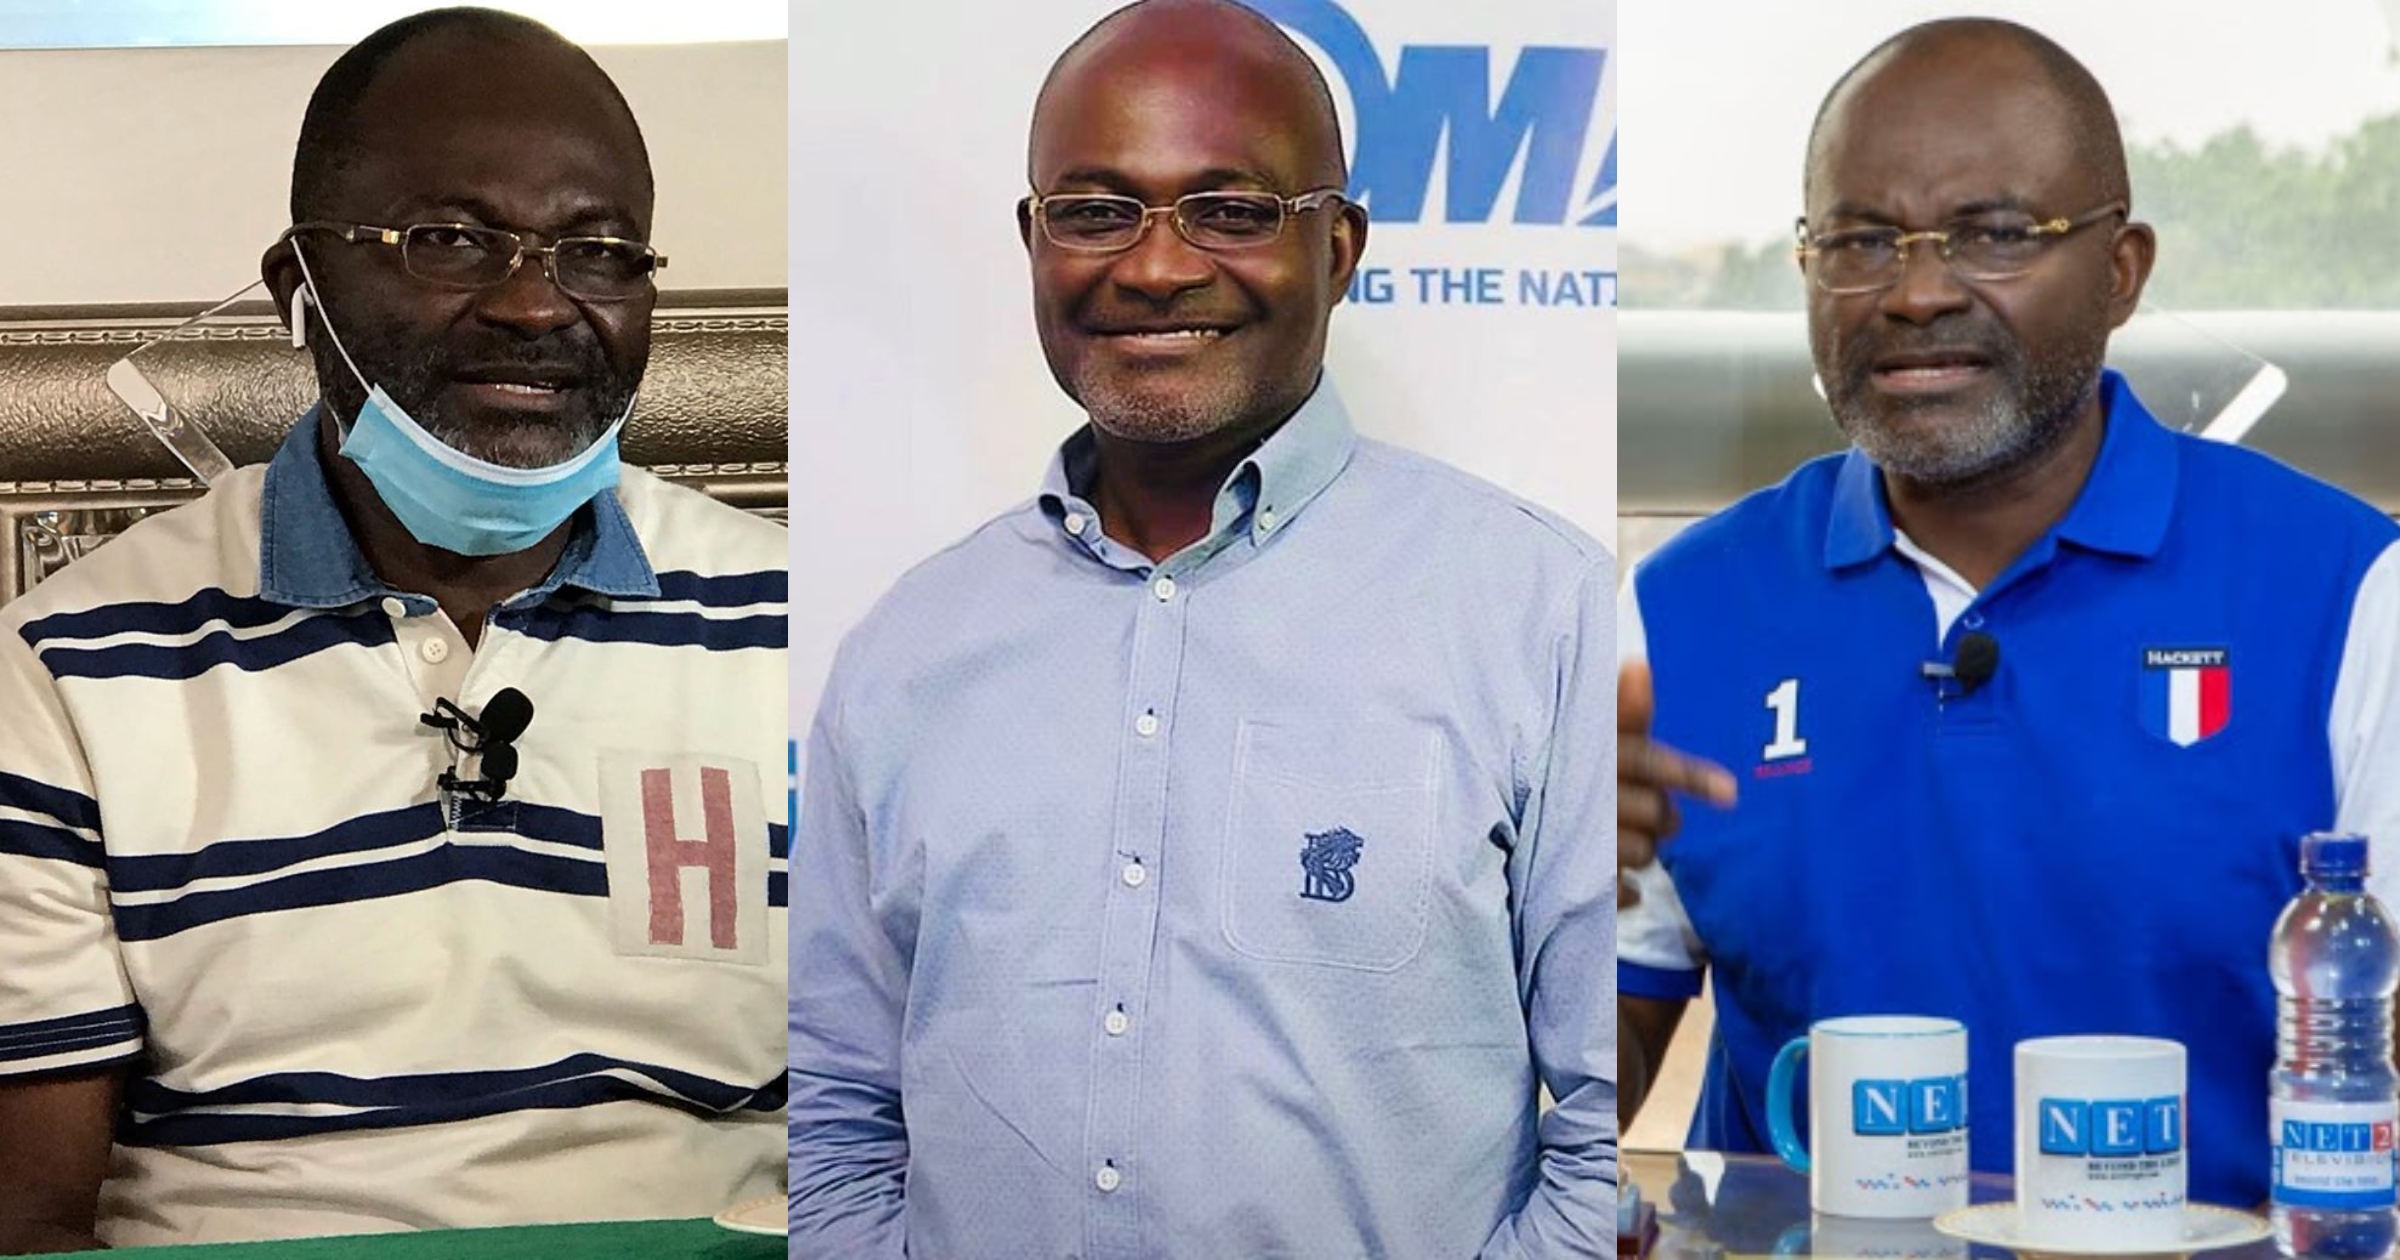 Your service to a man is what will make him marry you - Kennedy Agyapong 'advises' young women